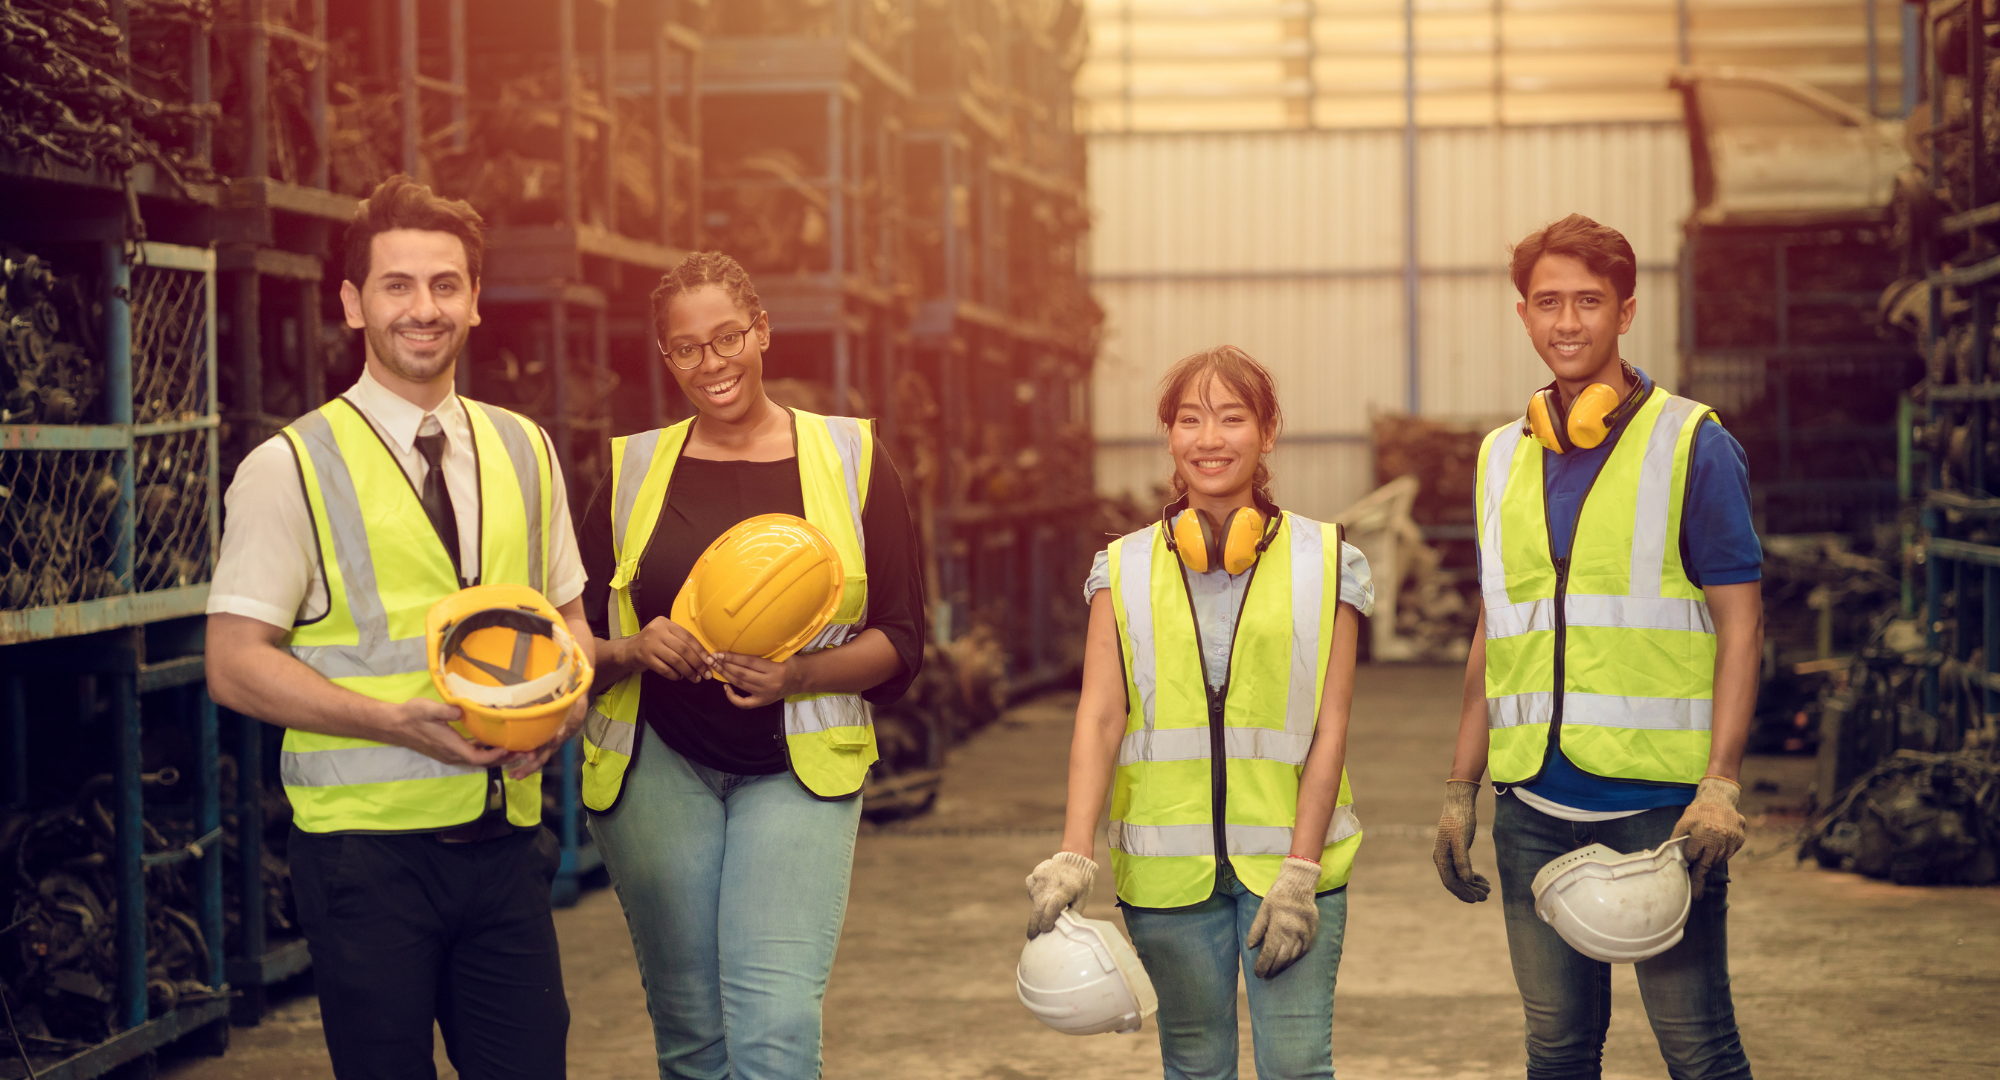 diverse group of factory workers inside a shop wearing bright vests and smiling at the camera happily